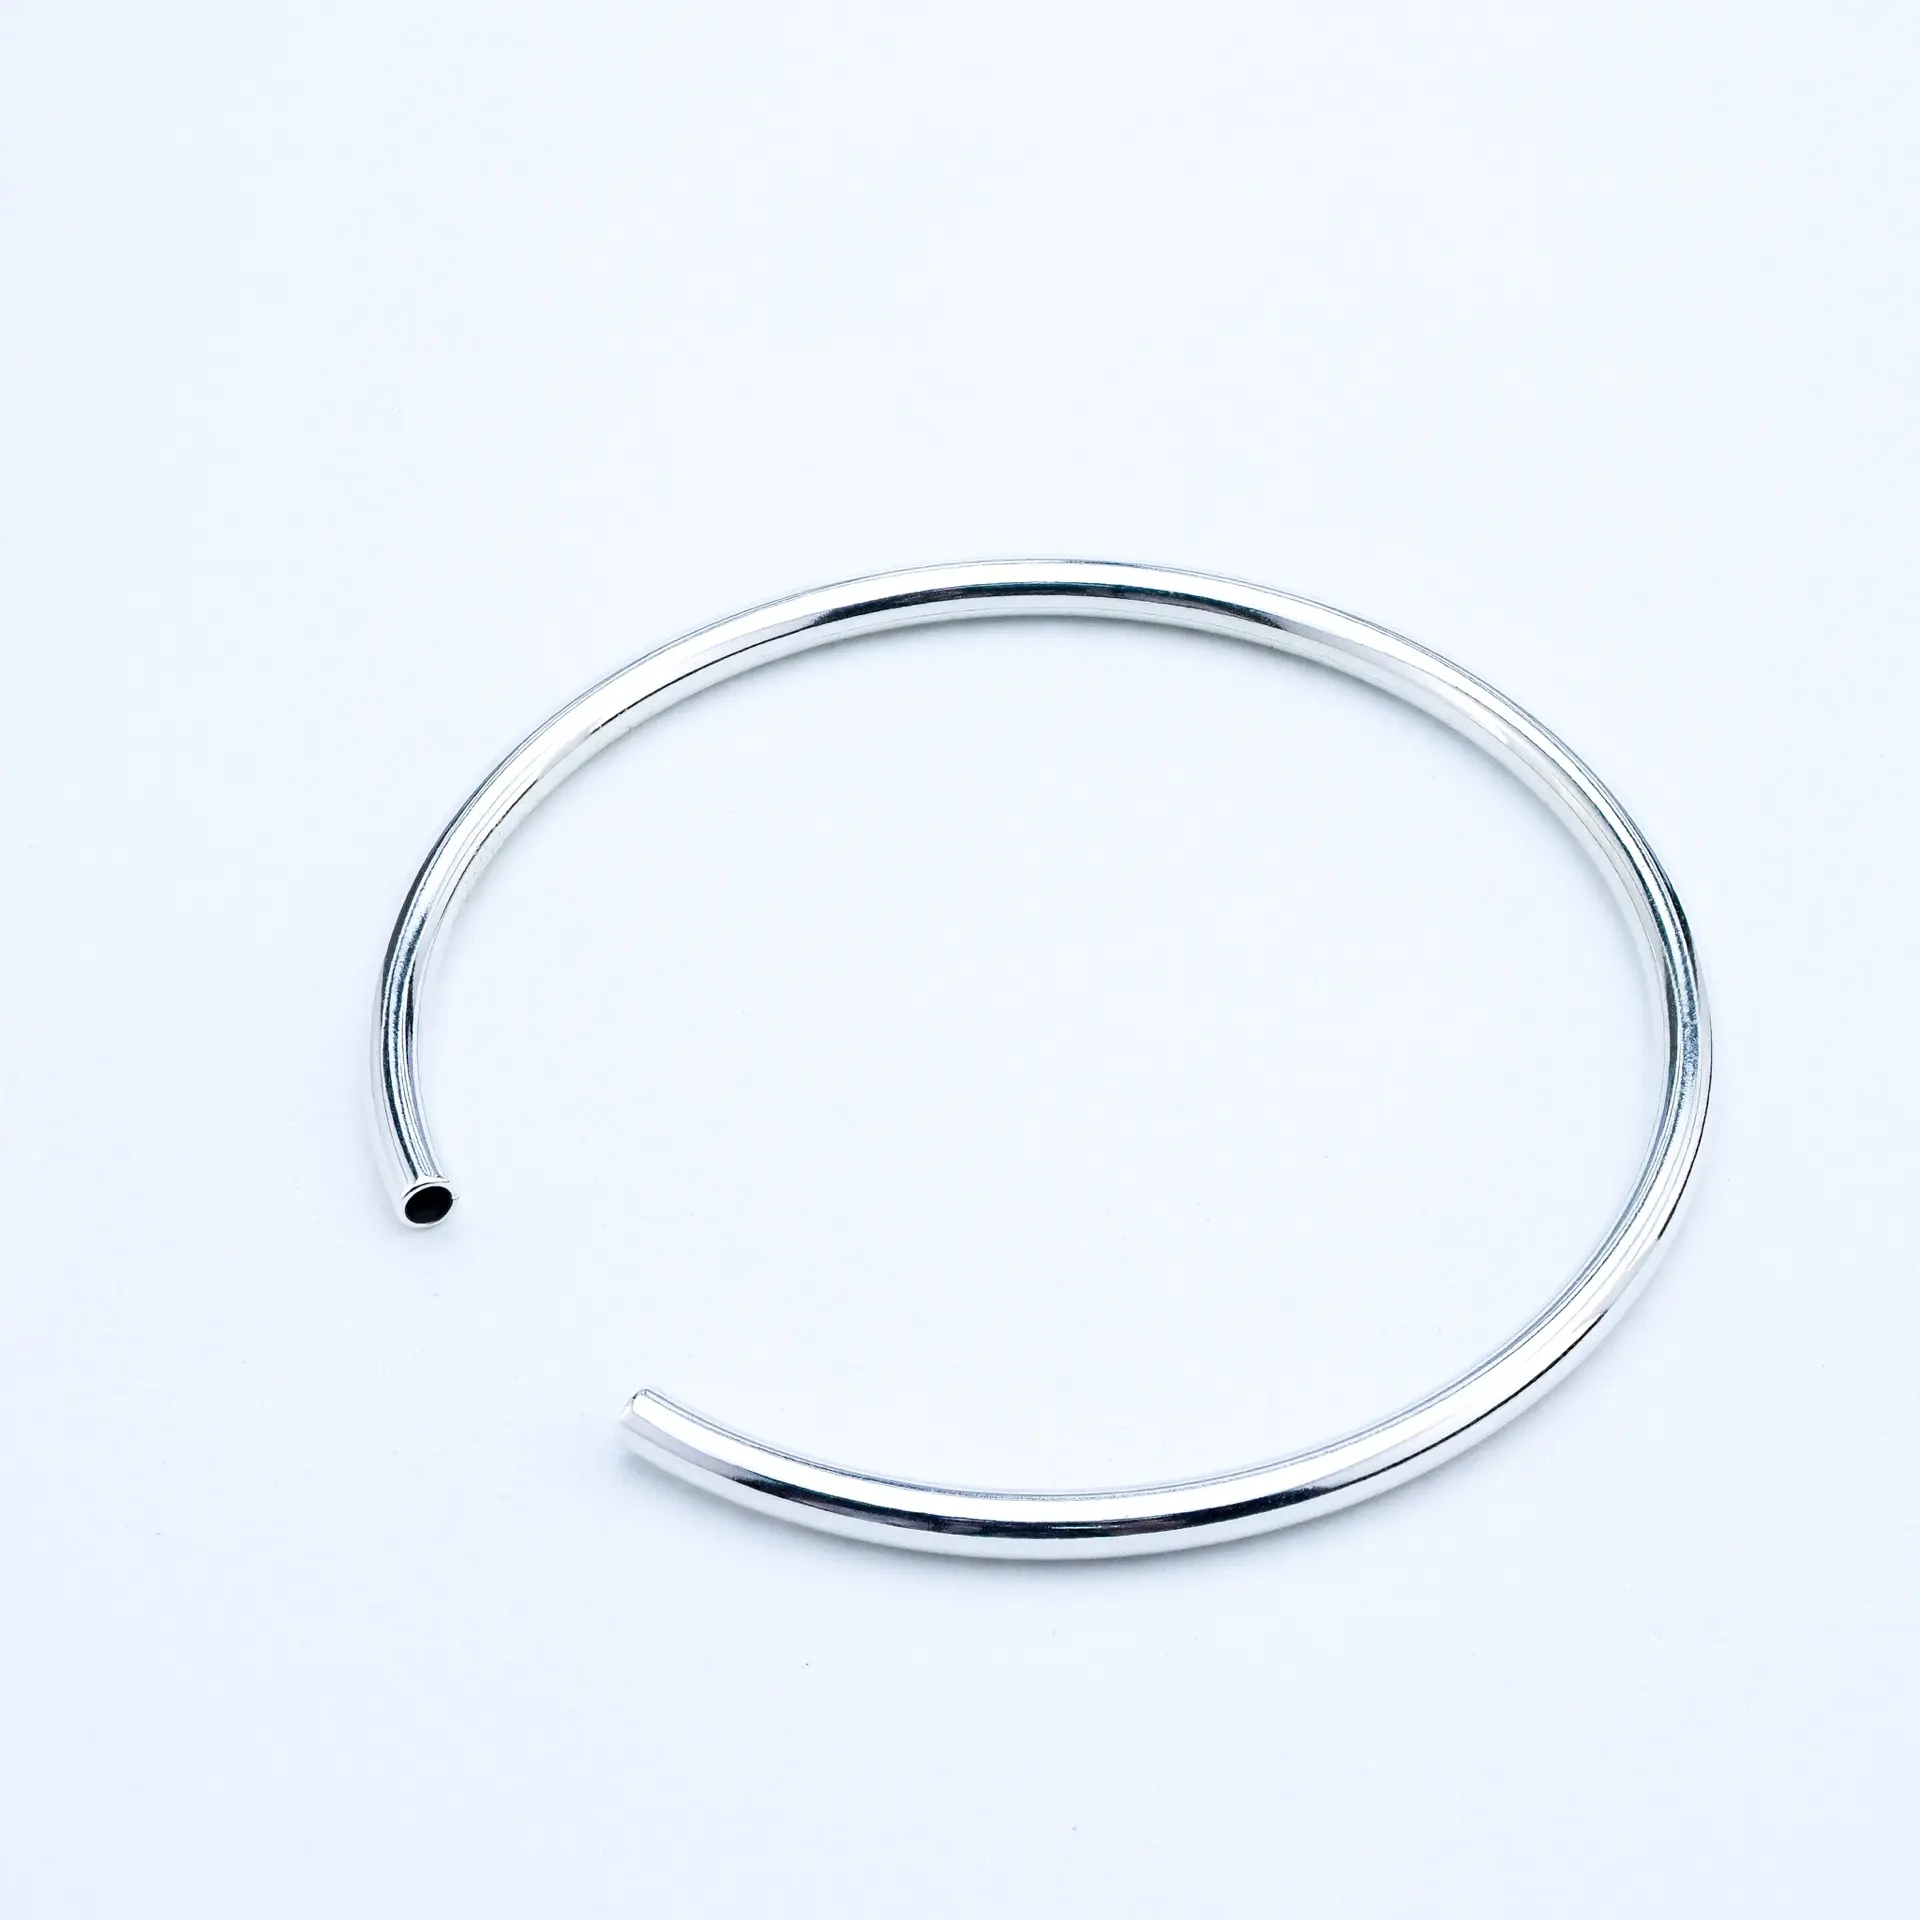 High Quality Flexible Bangle Silver 925 Jewelry Parts for Jewelry Making High Polishing Finish Wholesale Price from Thailand